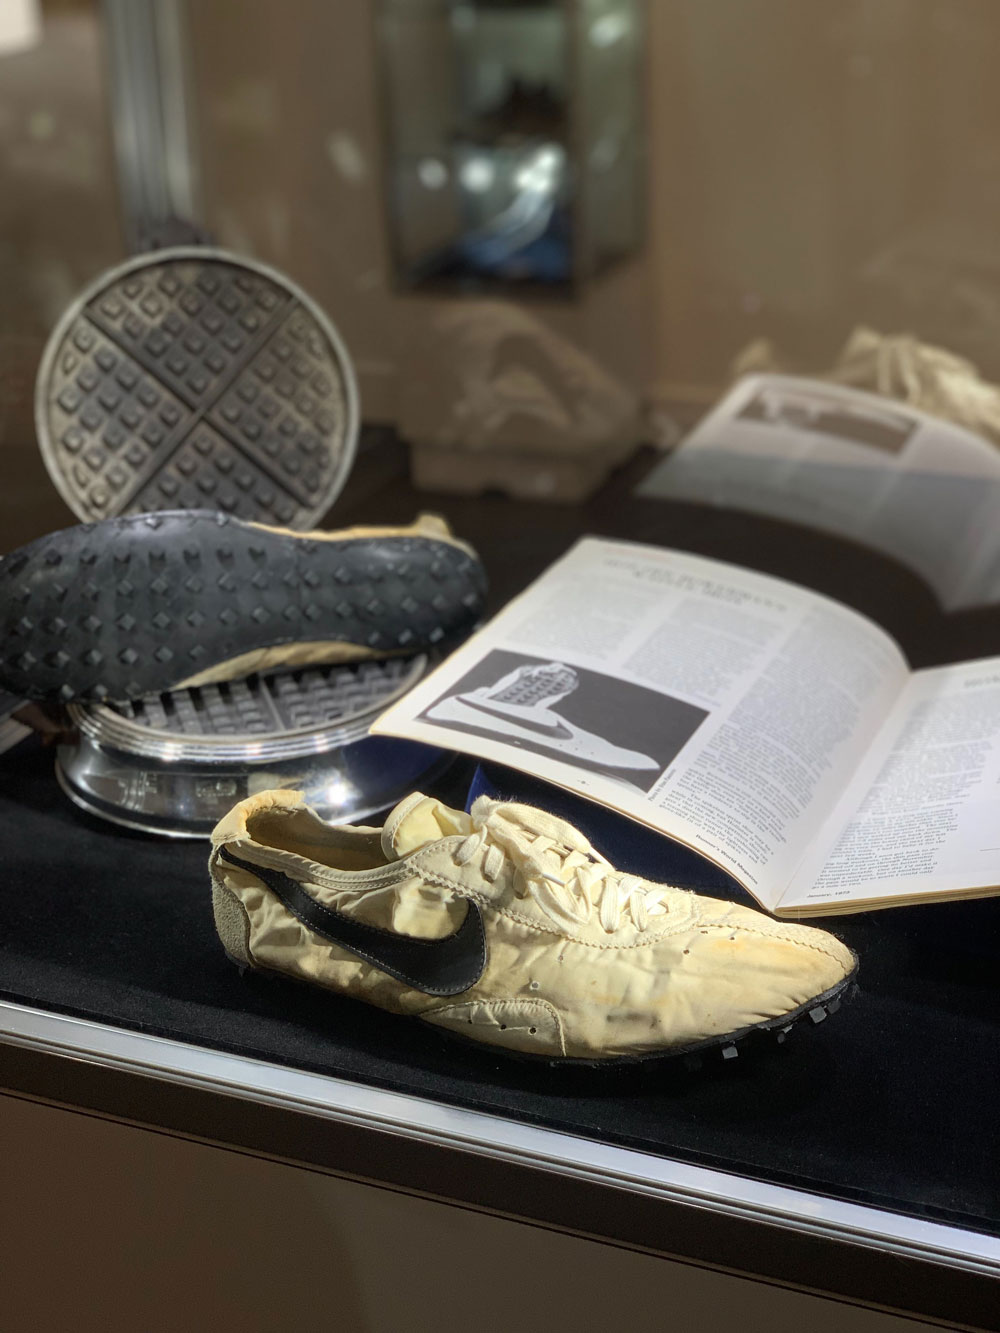 Nike Relics' Auction Includes Nike x Louis Vuitton Sneakers – Footwear News